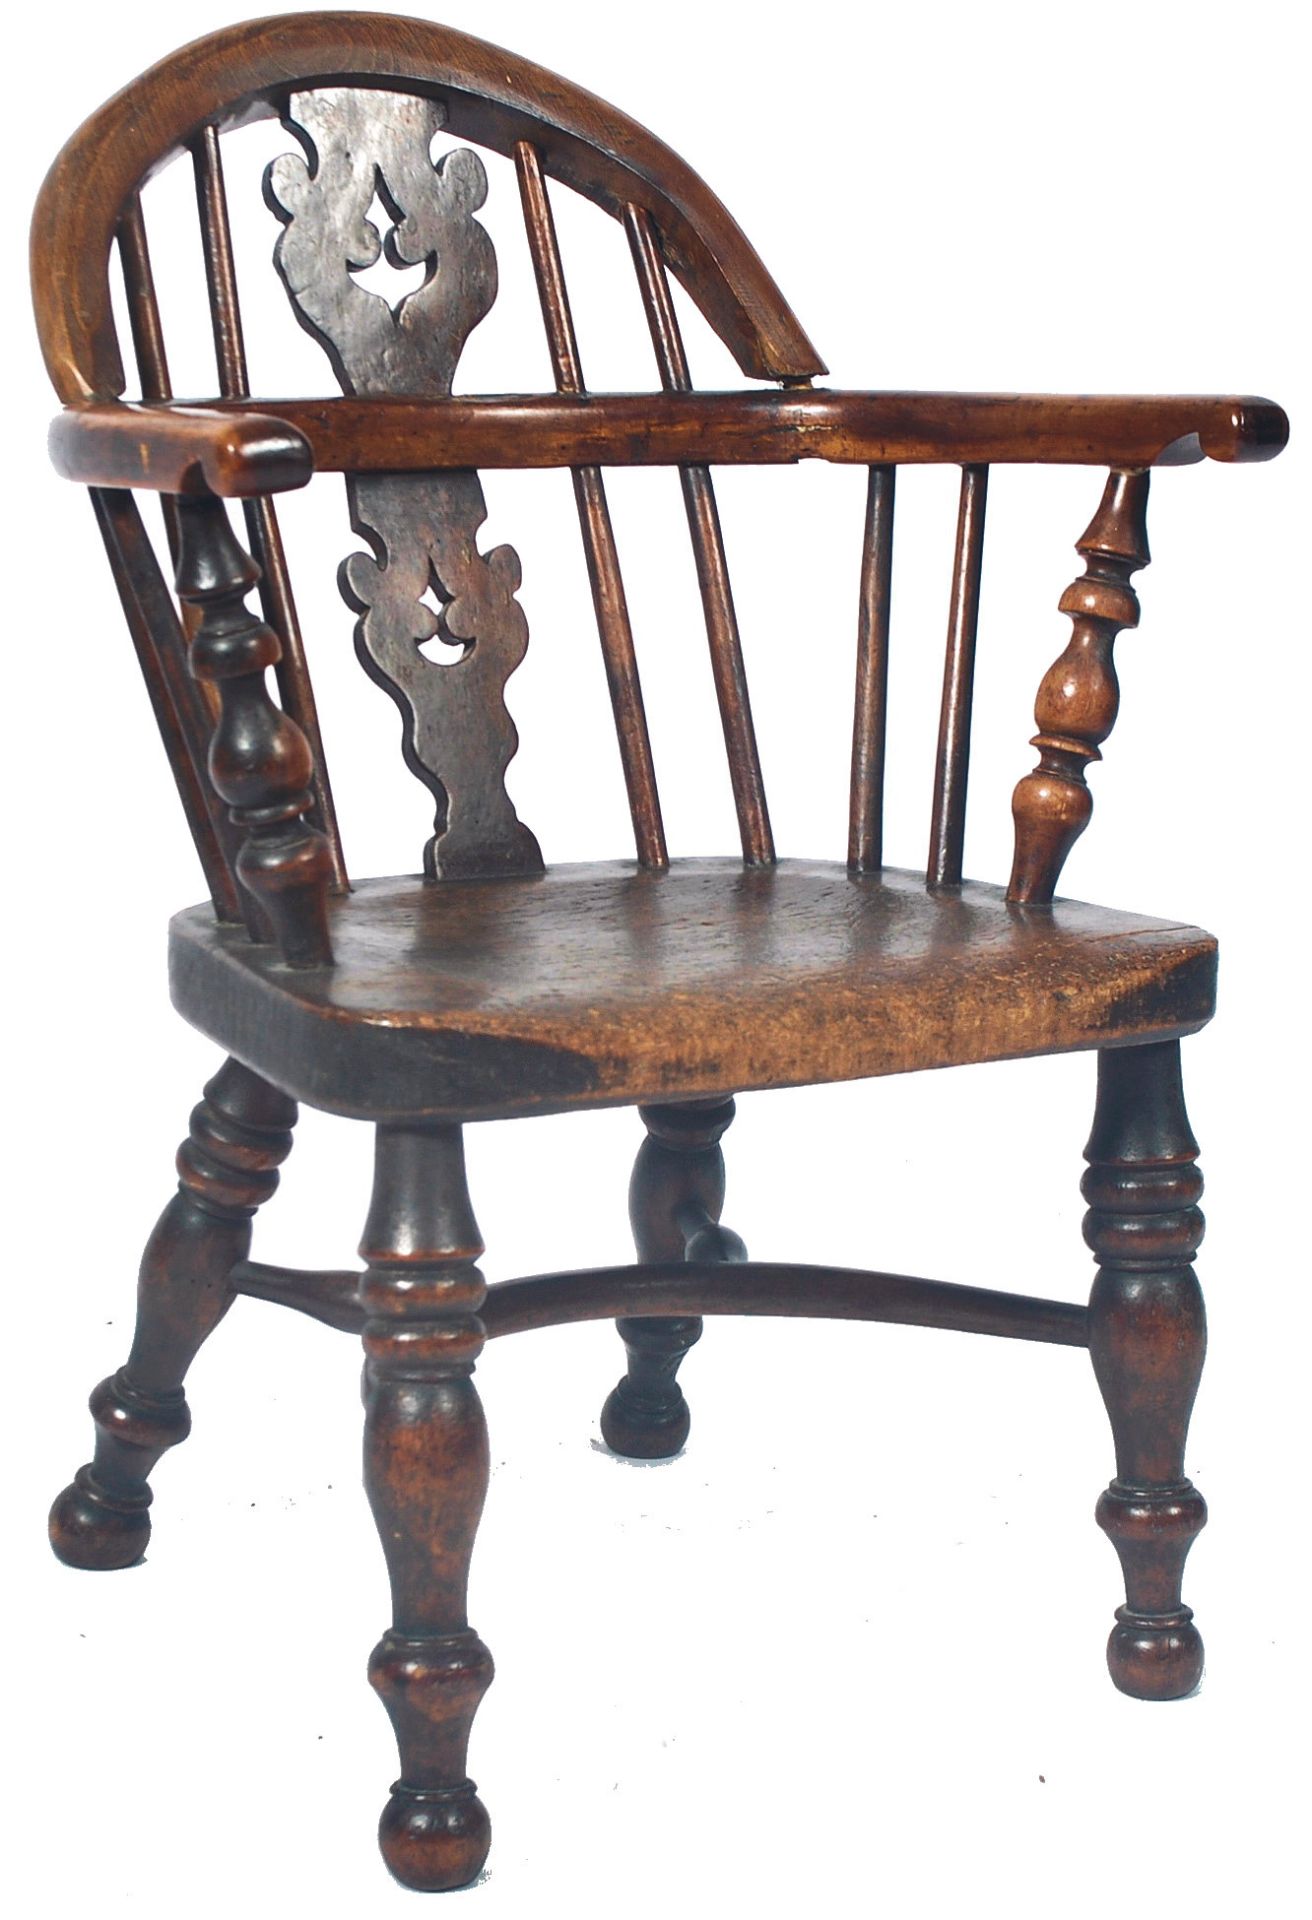 RARE ANTIQUE COUNTRY HOUSE YEW AND ELM CHILDS WINDSOR CHAIR